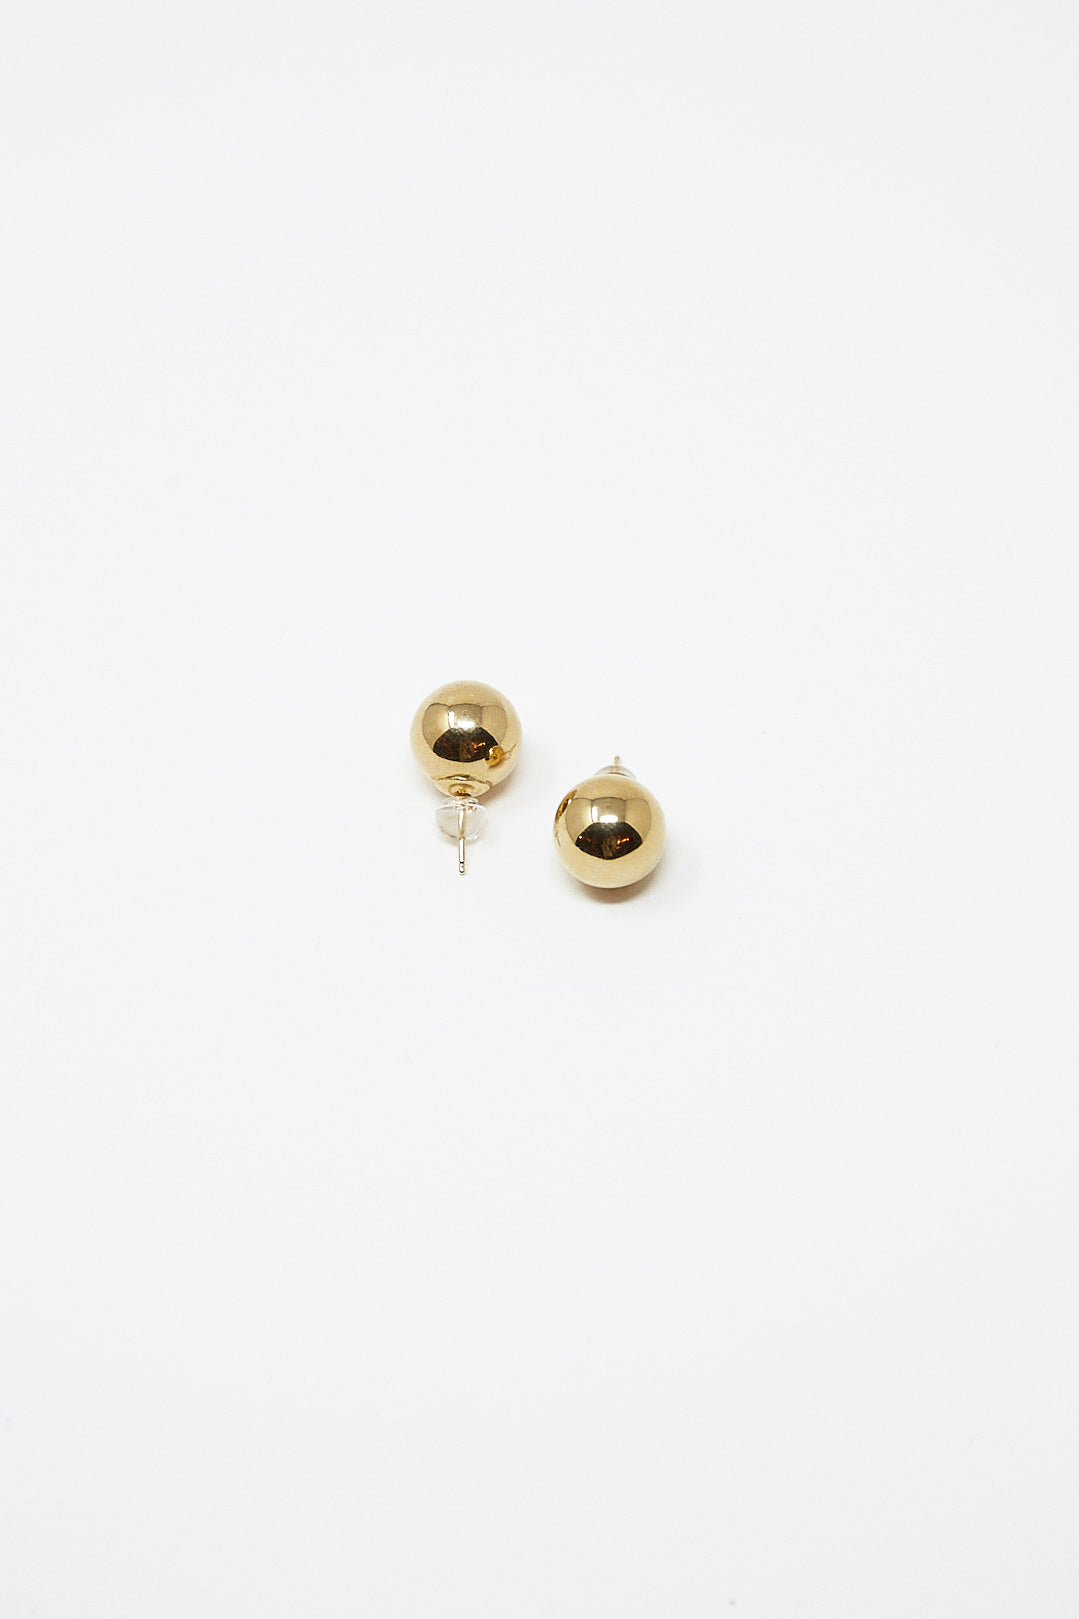 A pair of Kathleen Whitaker Sphere Stud Large 12mm Single Earrings in 14K Yellow Gold on a white surface in Los Angeles.